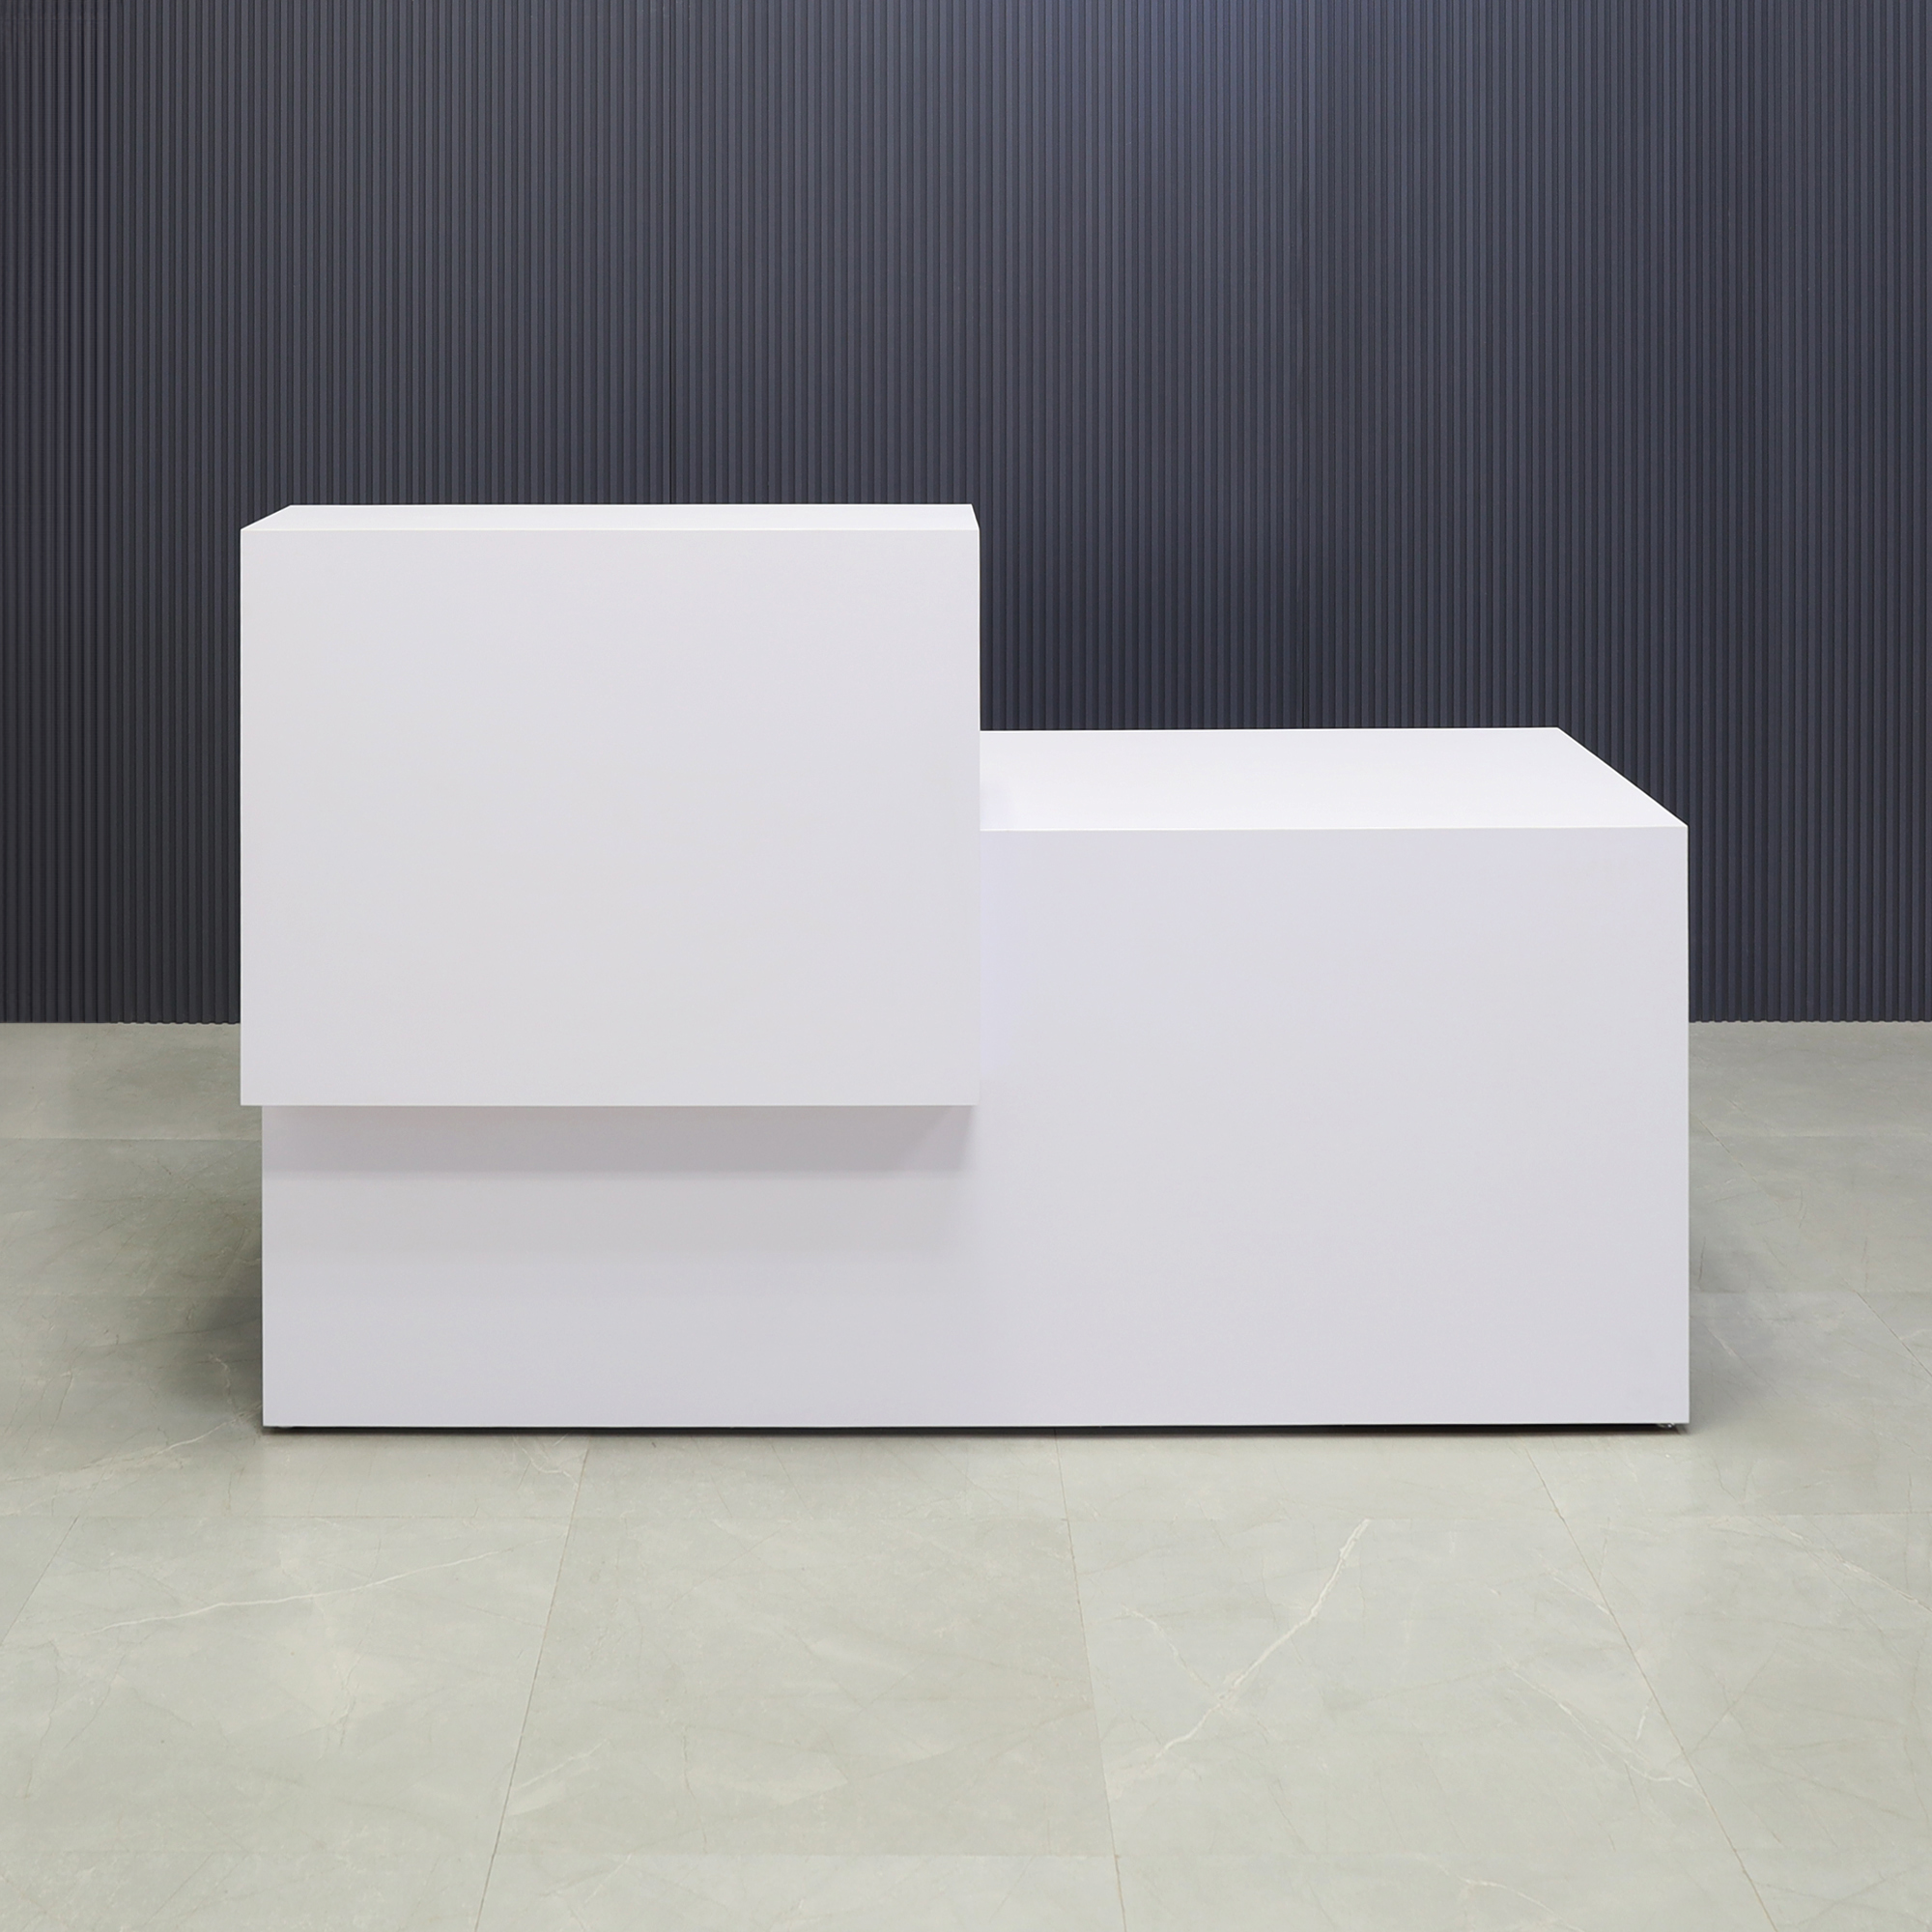 72-inch Los Angeles Reception Desk, left side counter when facing front, in white gloss laminate counter and desk, shown here.